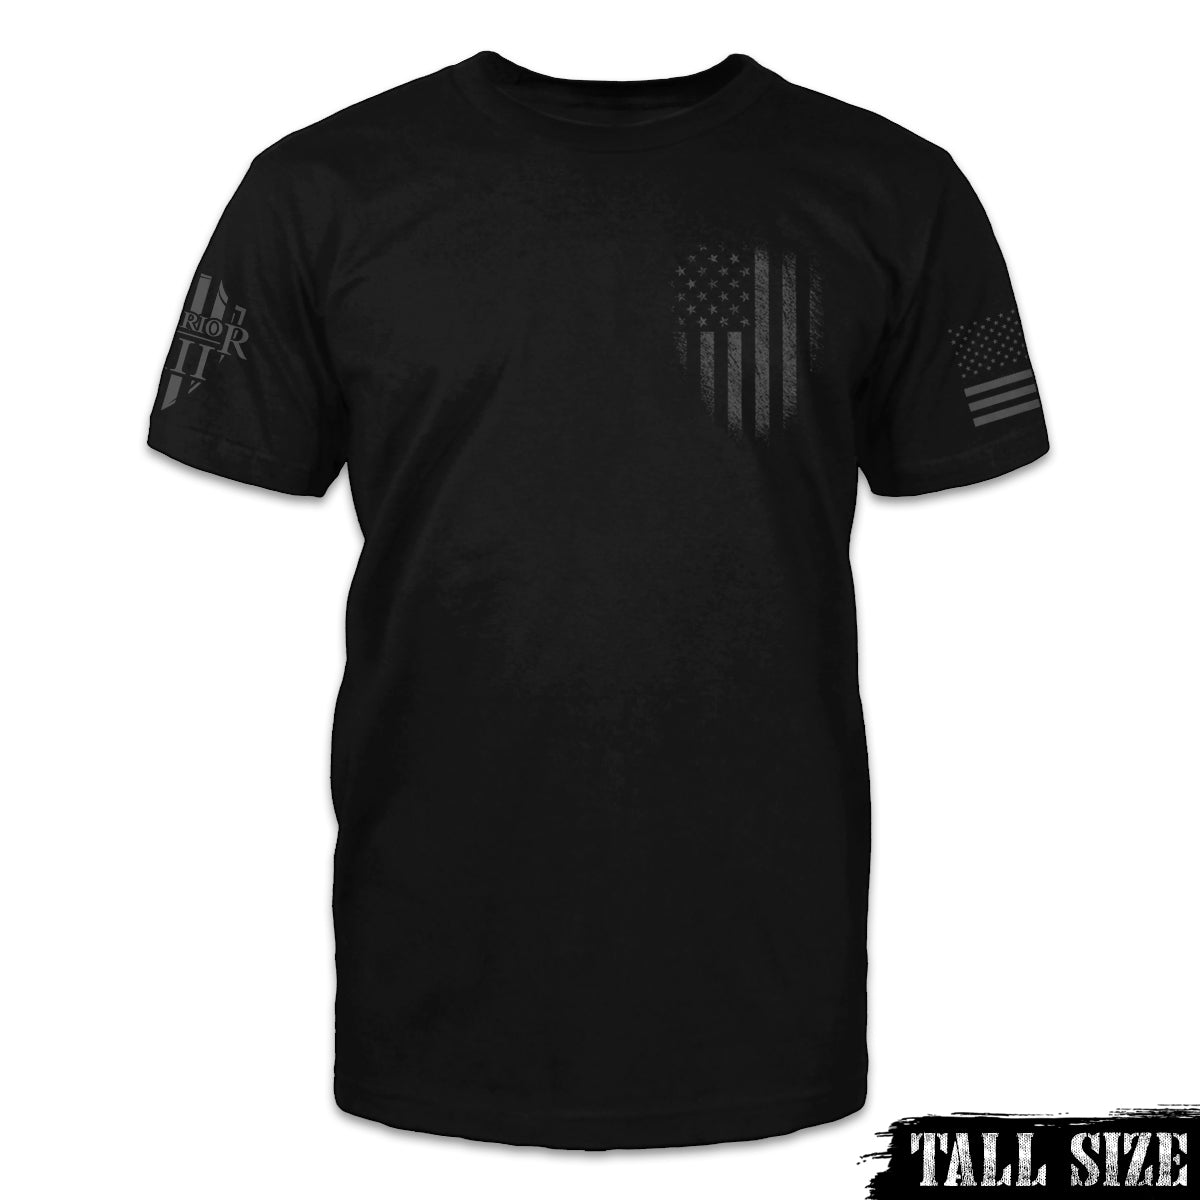 A darkened American flag emblem printed on the front of the tall sized t-shirt.